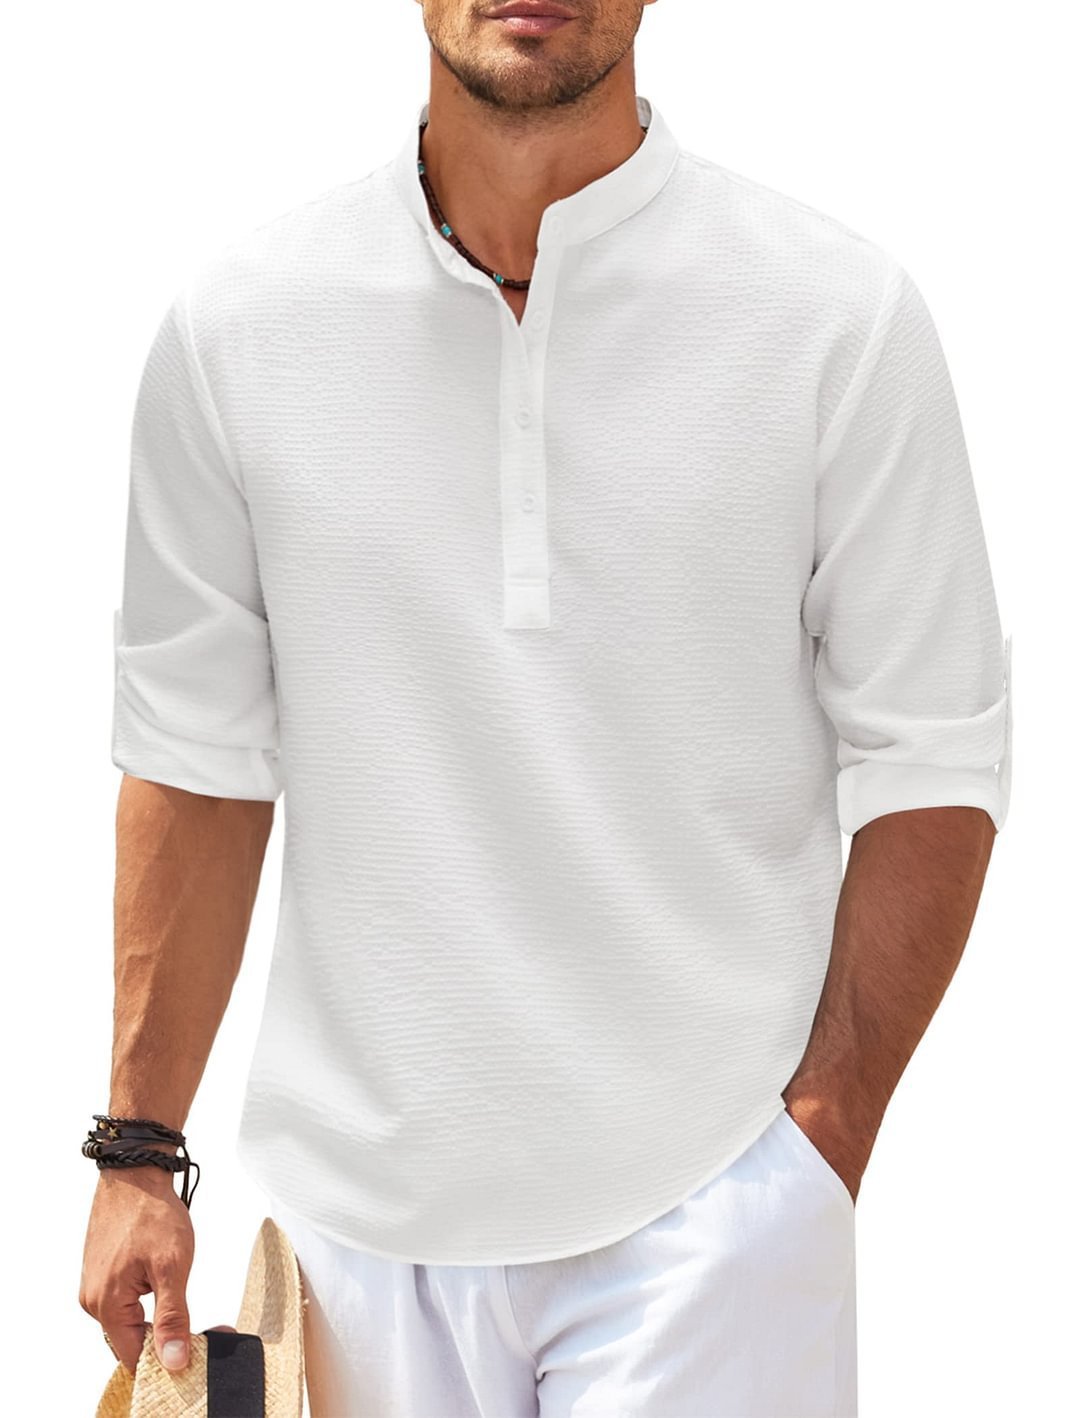 Men's Stand Collar Shirt - Casual Solid Color Long Sleeve